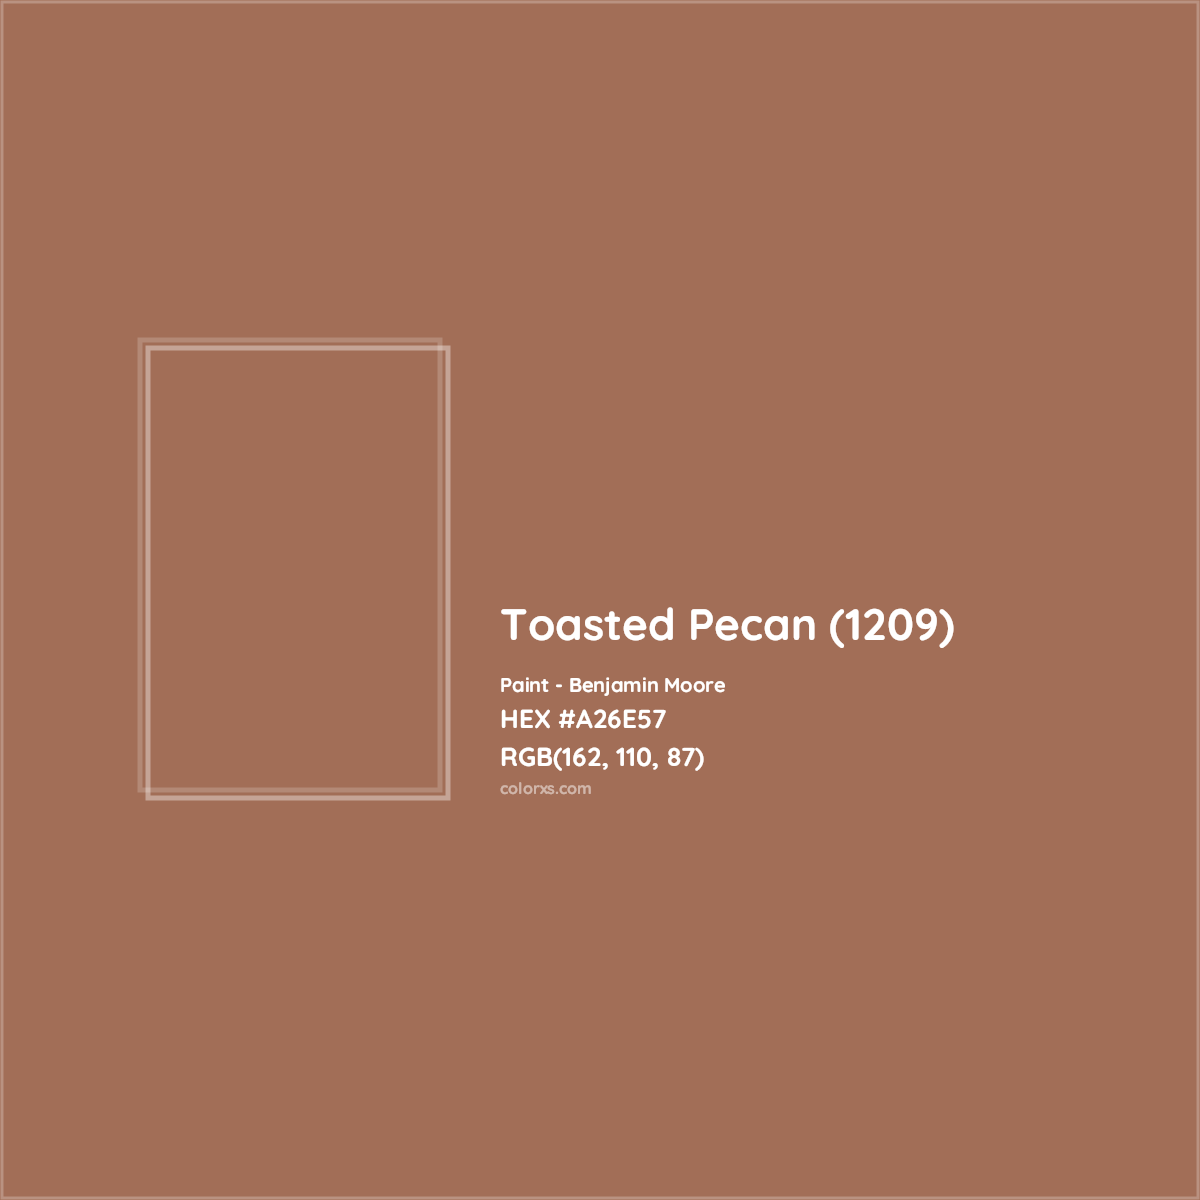 HEX #A26E57 Toasted Pecan (1209) Paint Benjamin Moore - Color Code